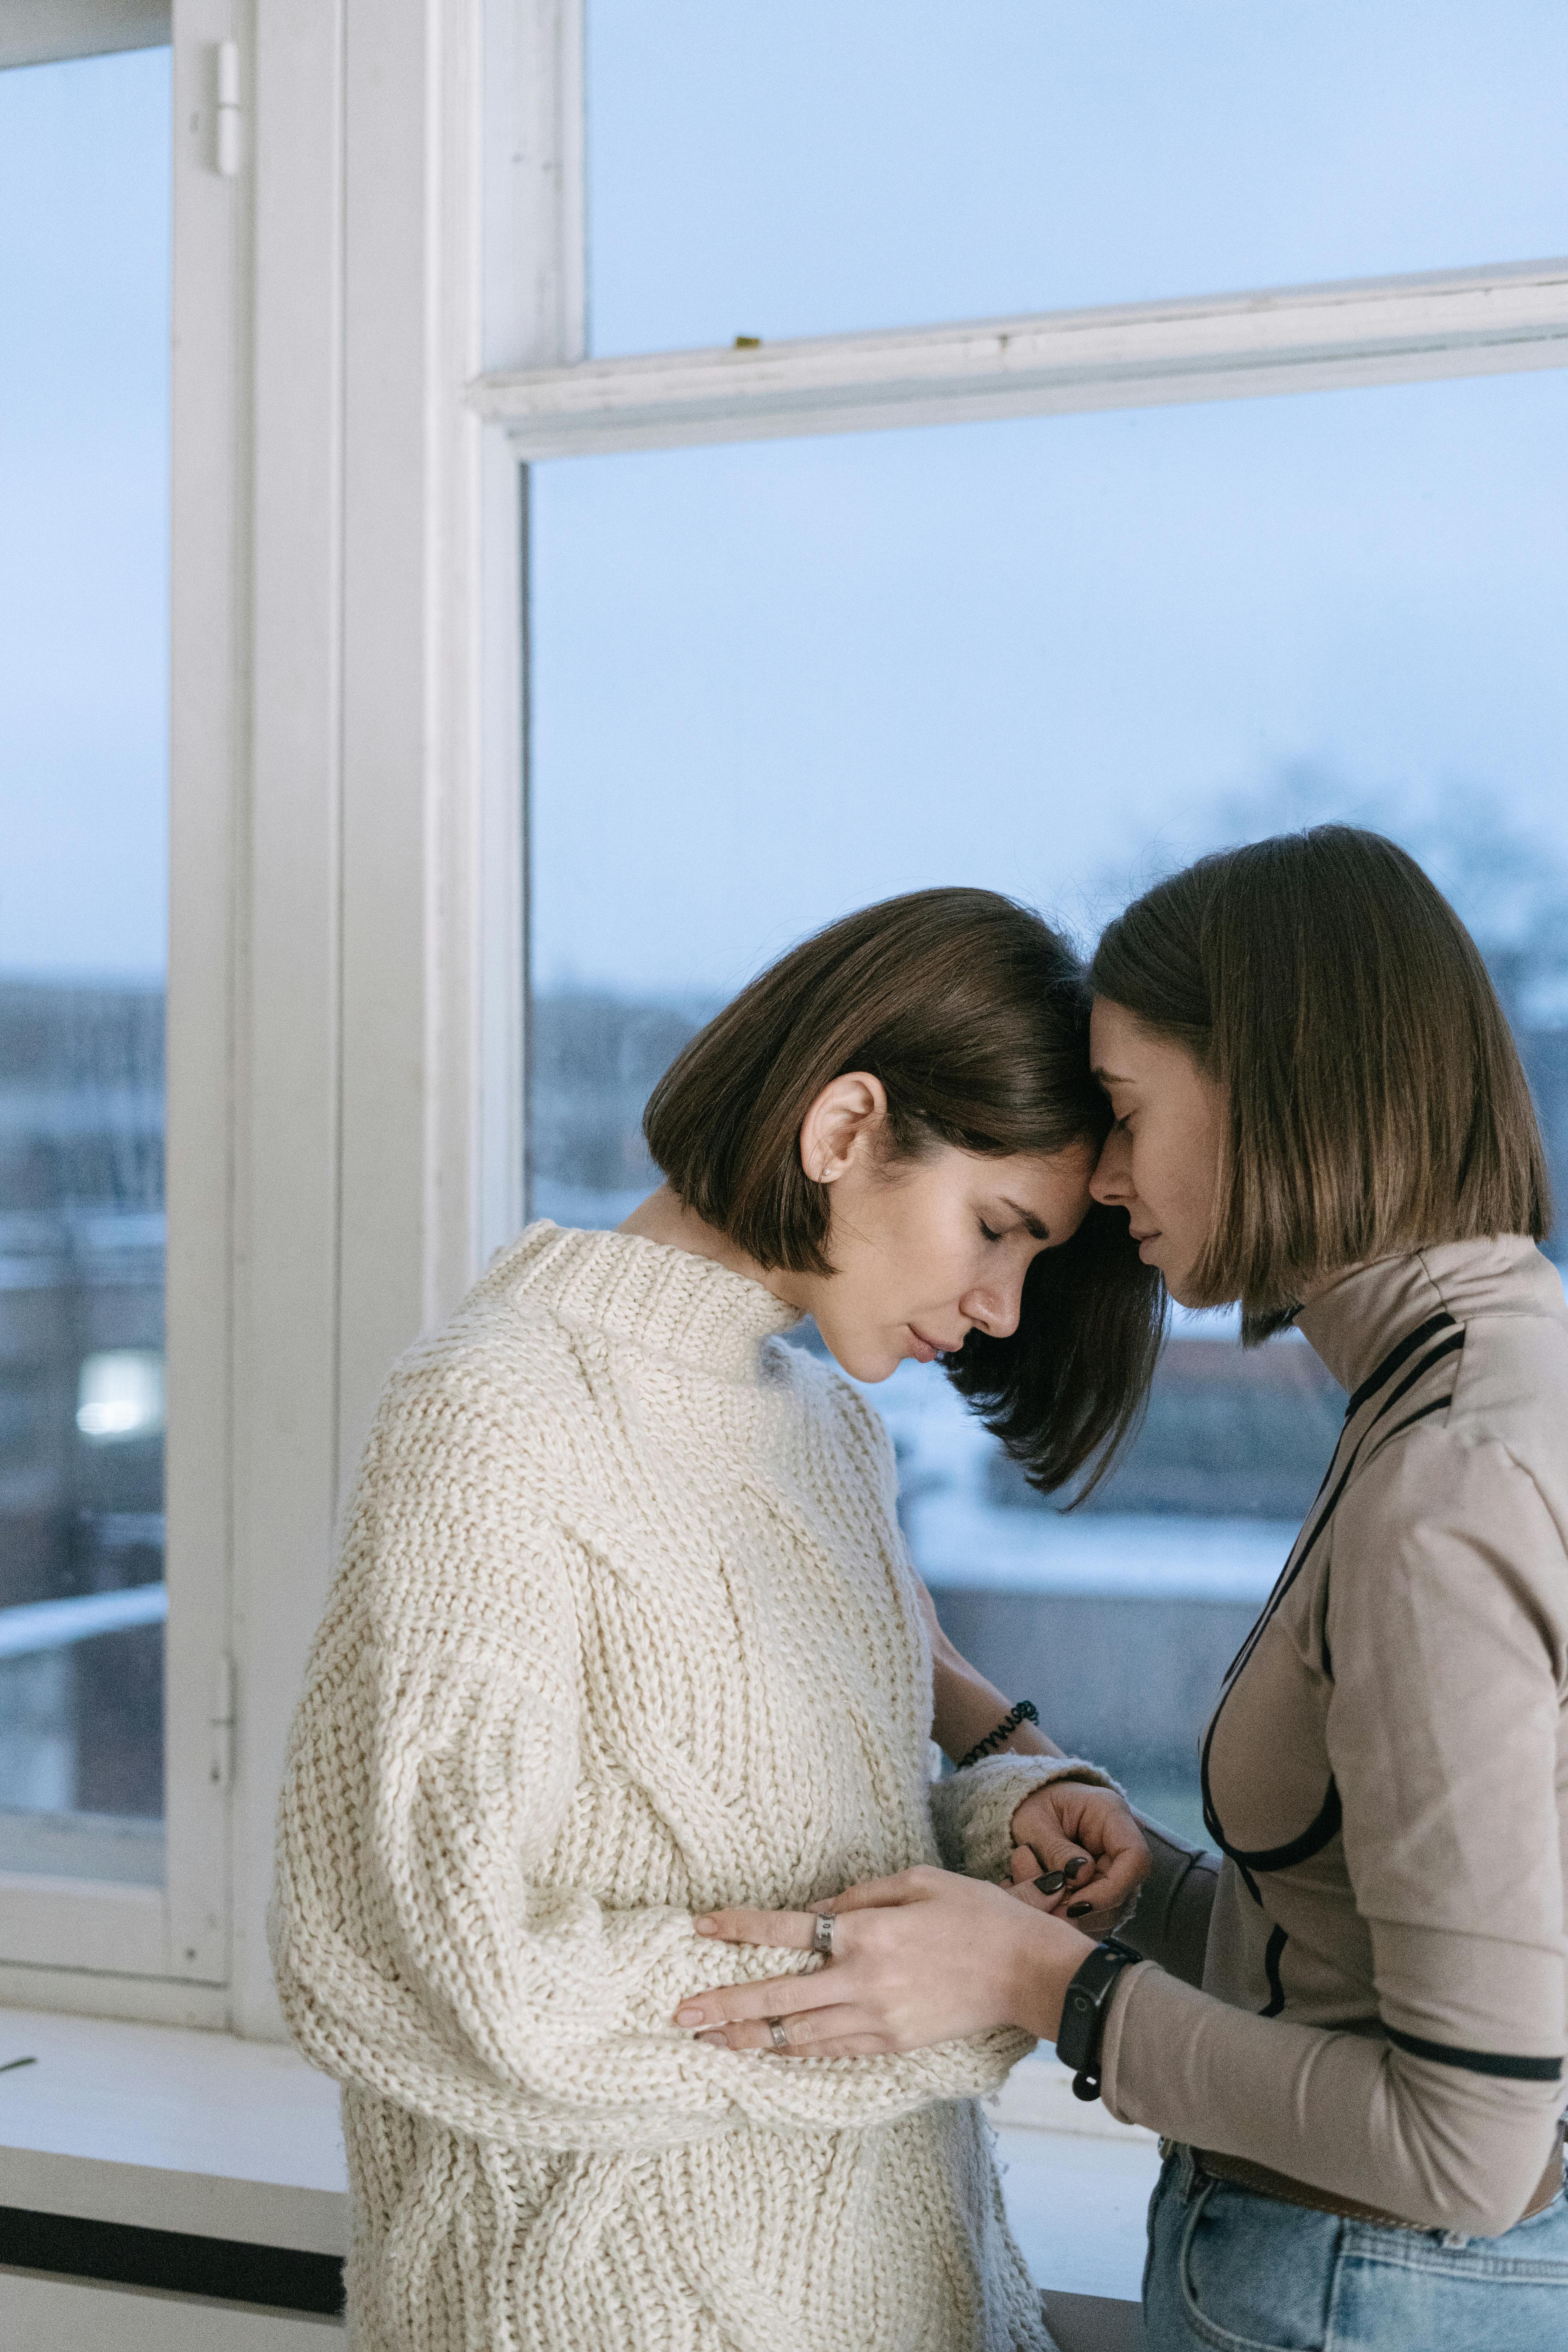 Two emotional women sharing a touching moment | Source: Pexels